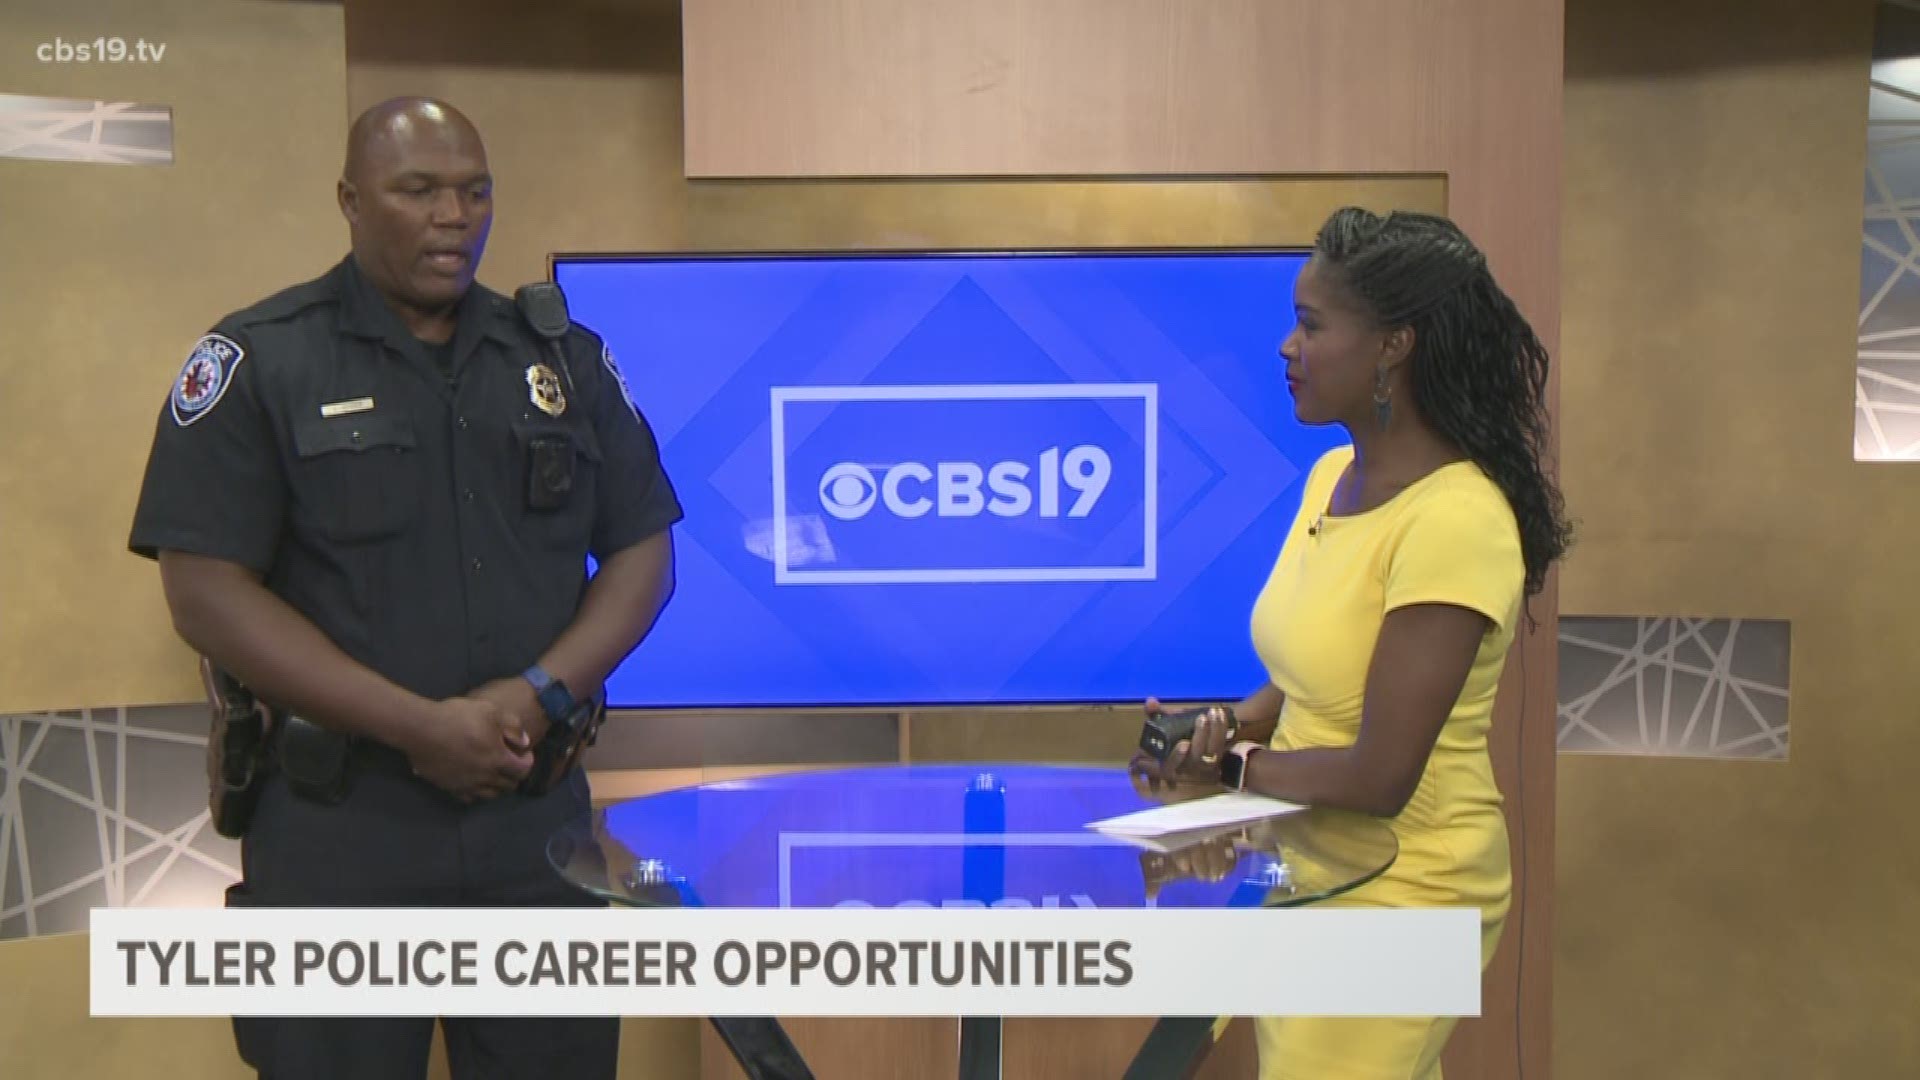 Tyler Police Officer, Shane Jasper joins Tashara Parker to discuss career opportunities with the Tyler Police Department. 